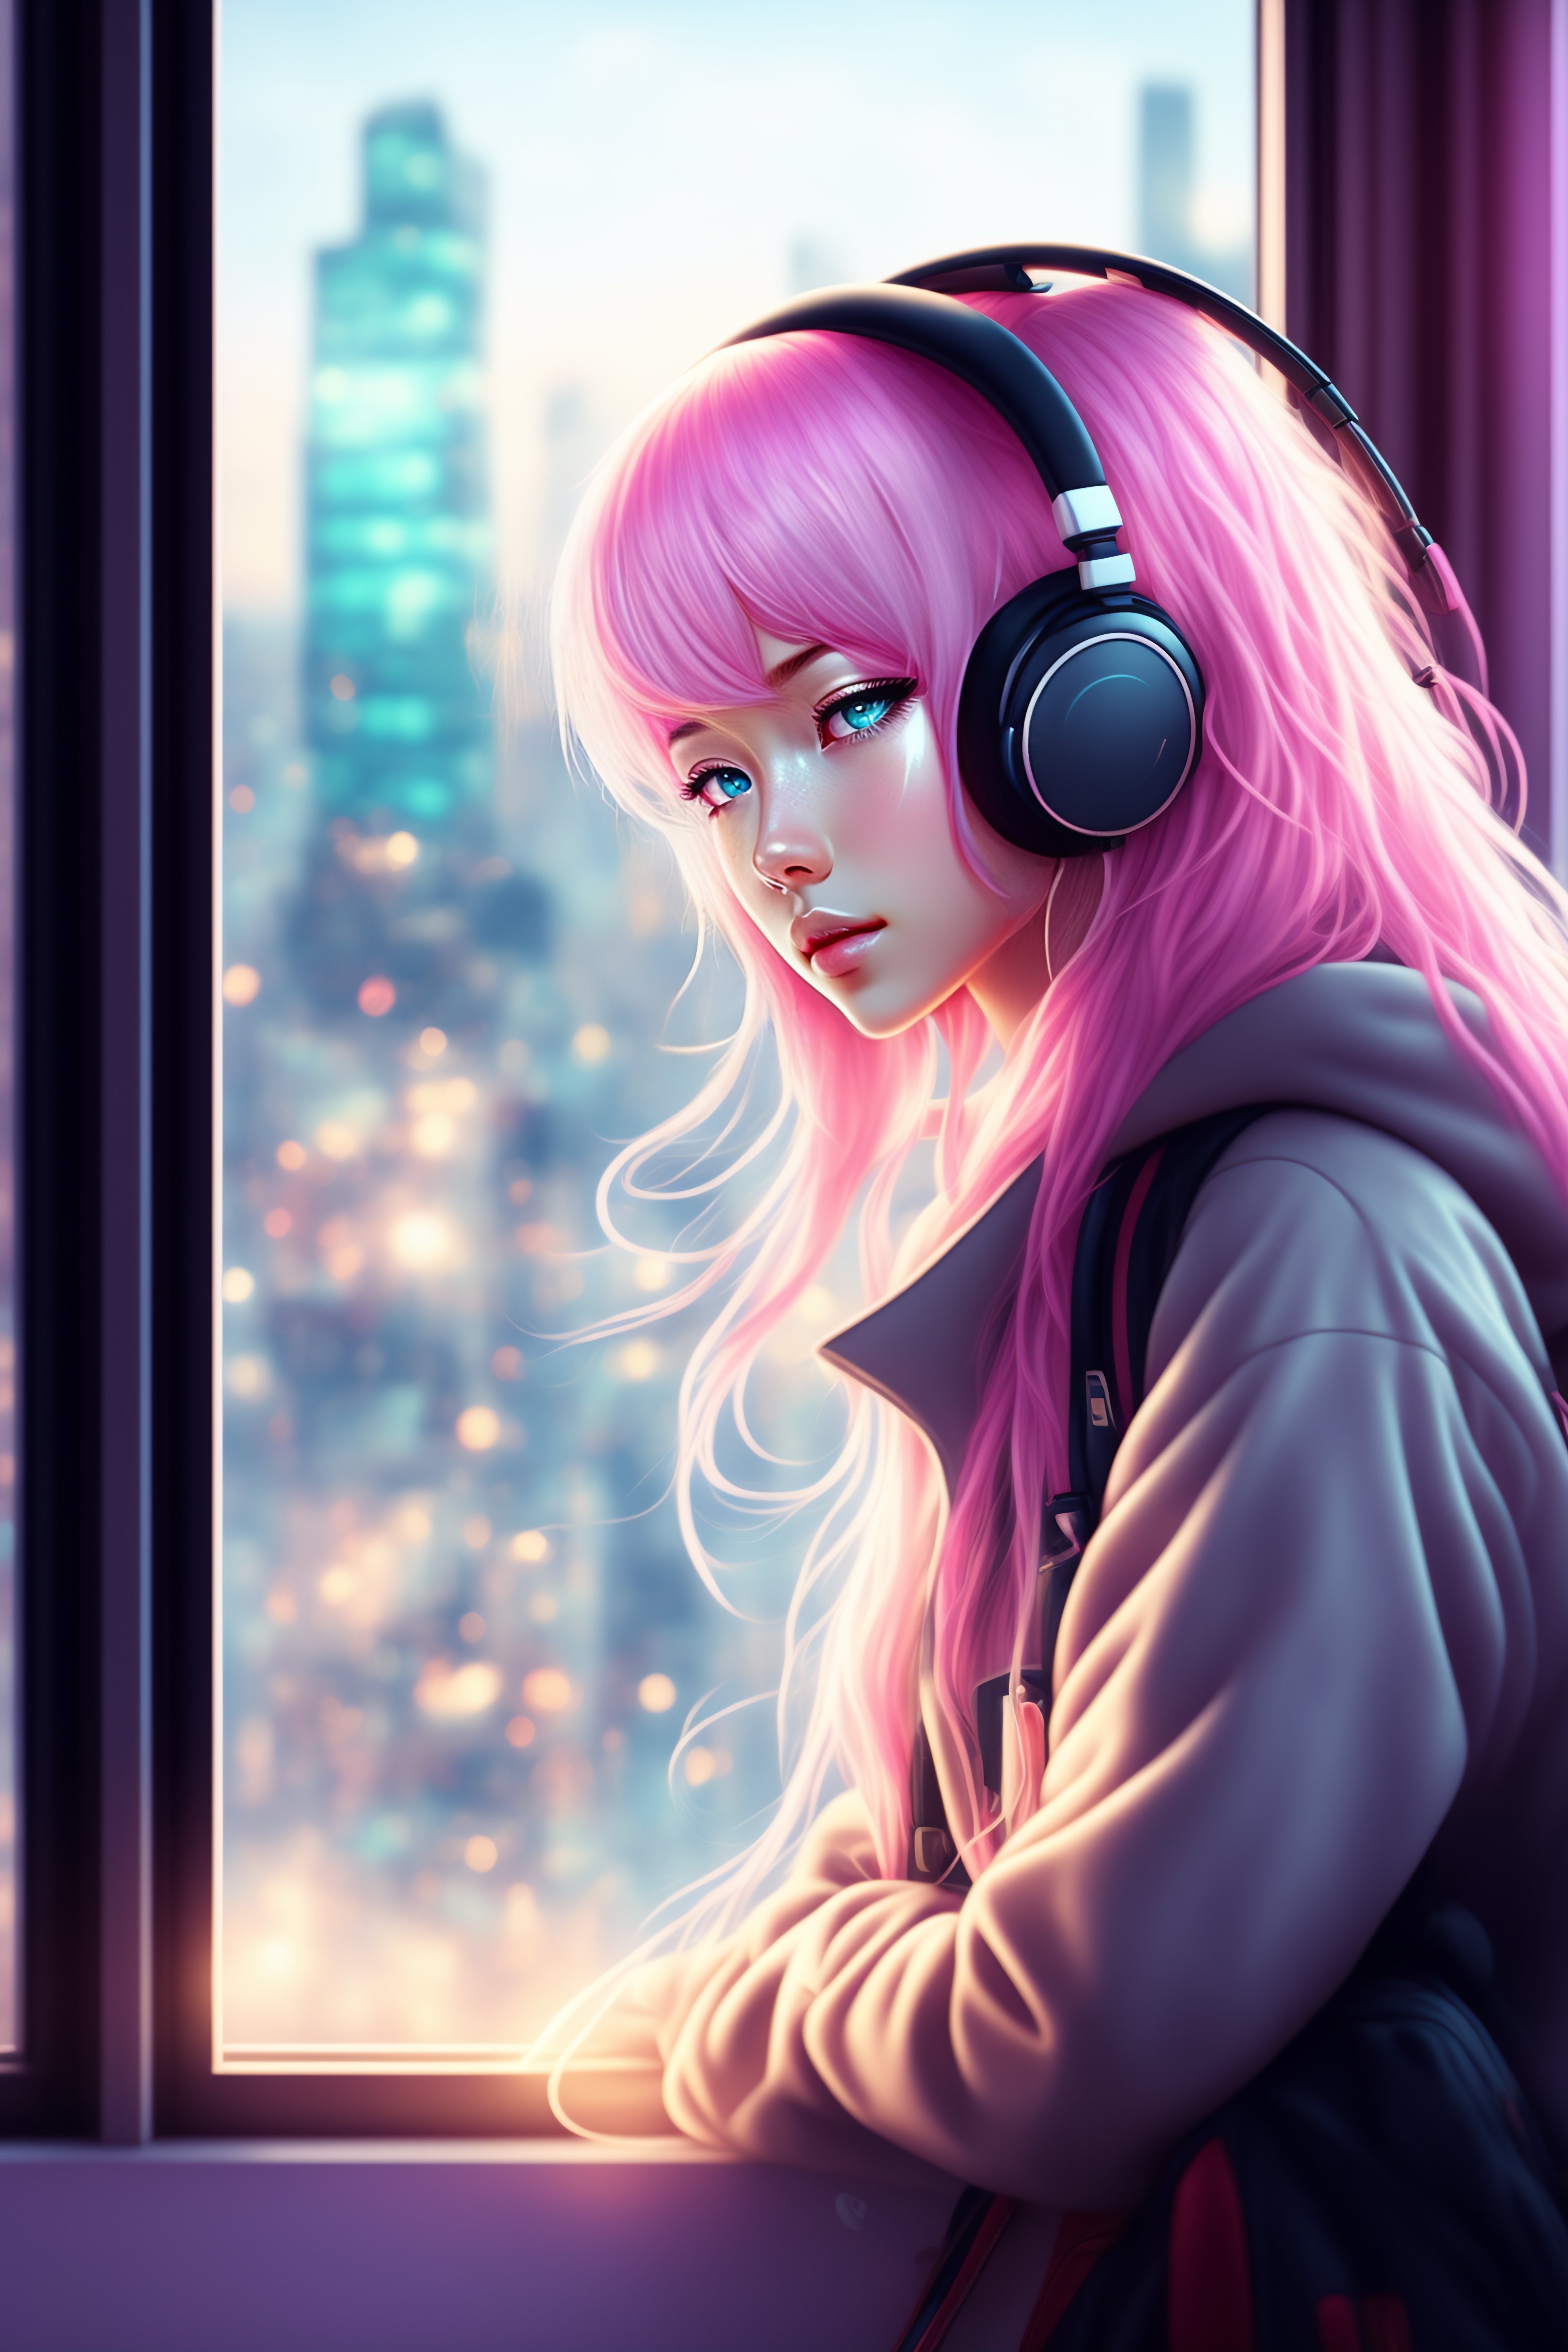 Lexica - Light pink haired girl listening music with her headphones in her  room. Anime style. Posters. Window with a town view